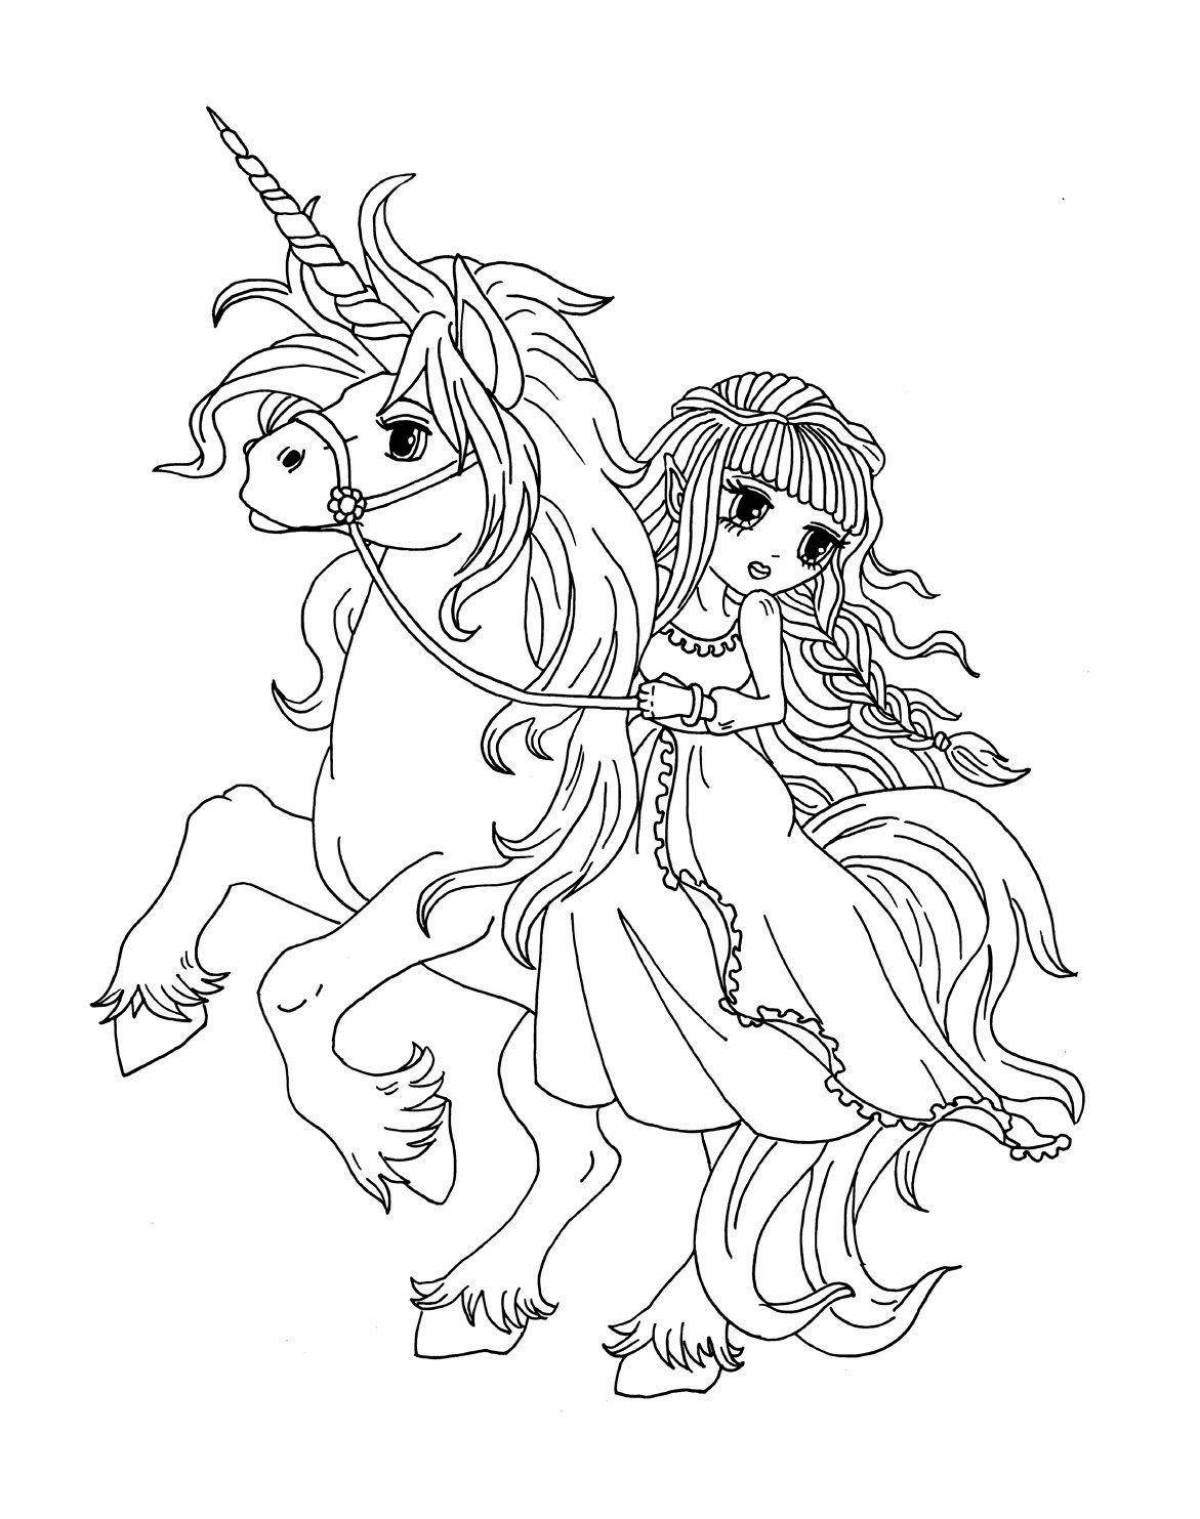 Blooming fairy and unicorn coloring page